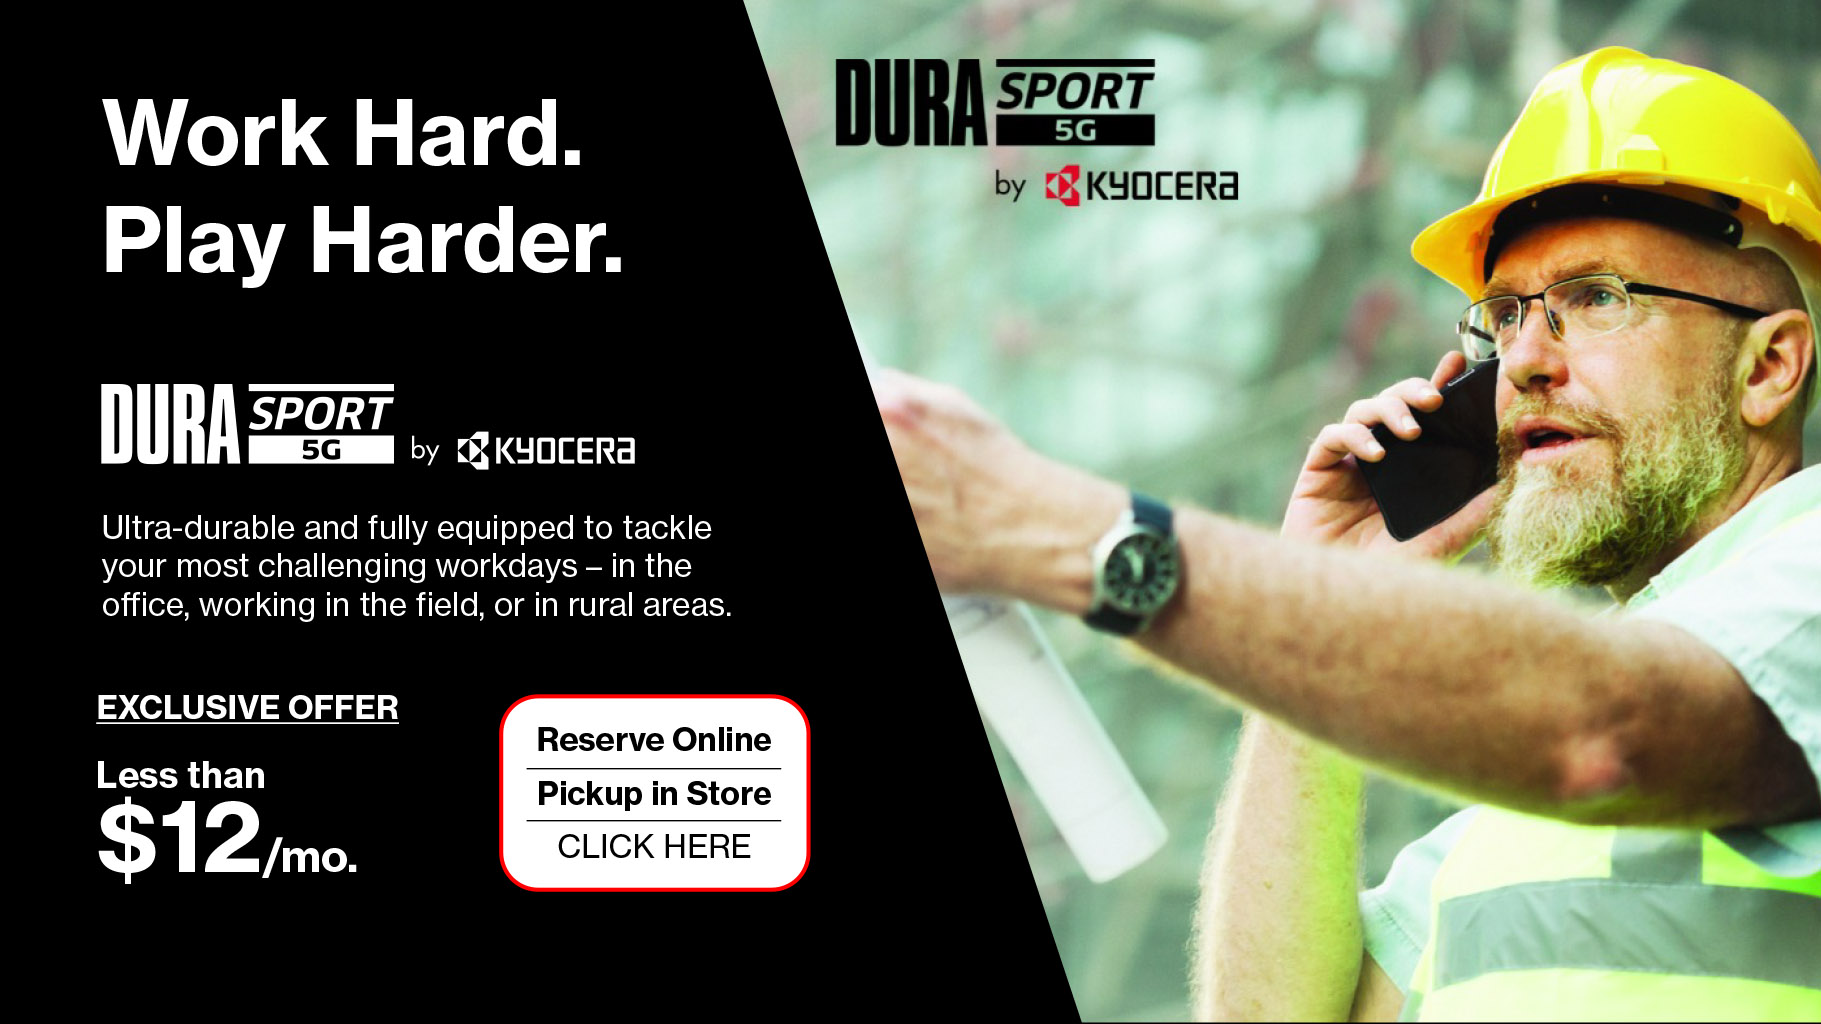 Exclusive Offer - Get the Kyocera DuraSport for less than $12/mo.